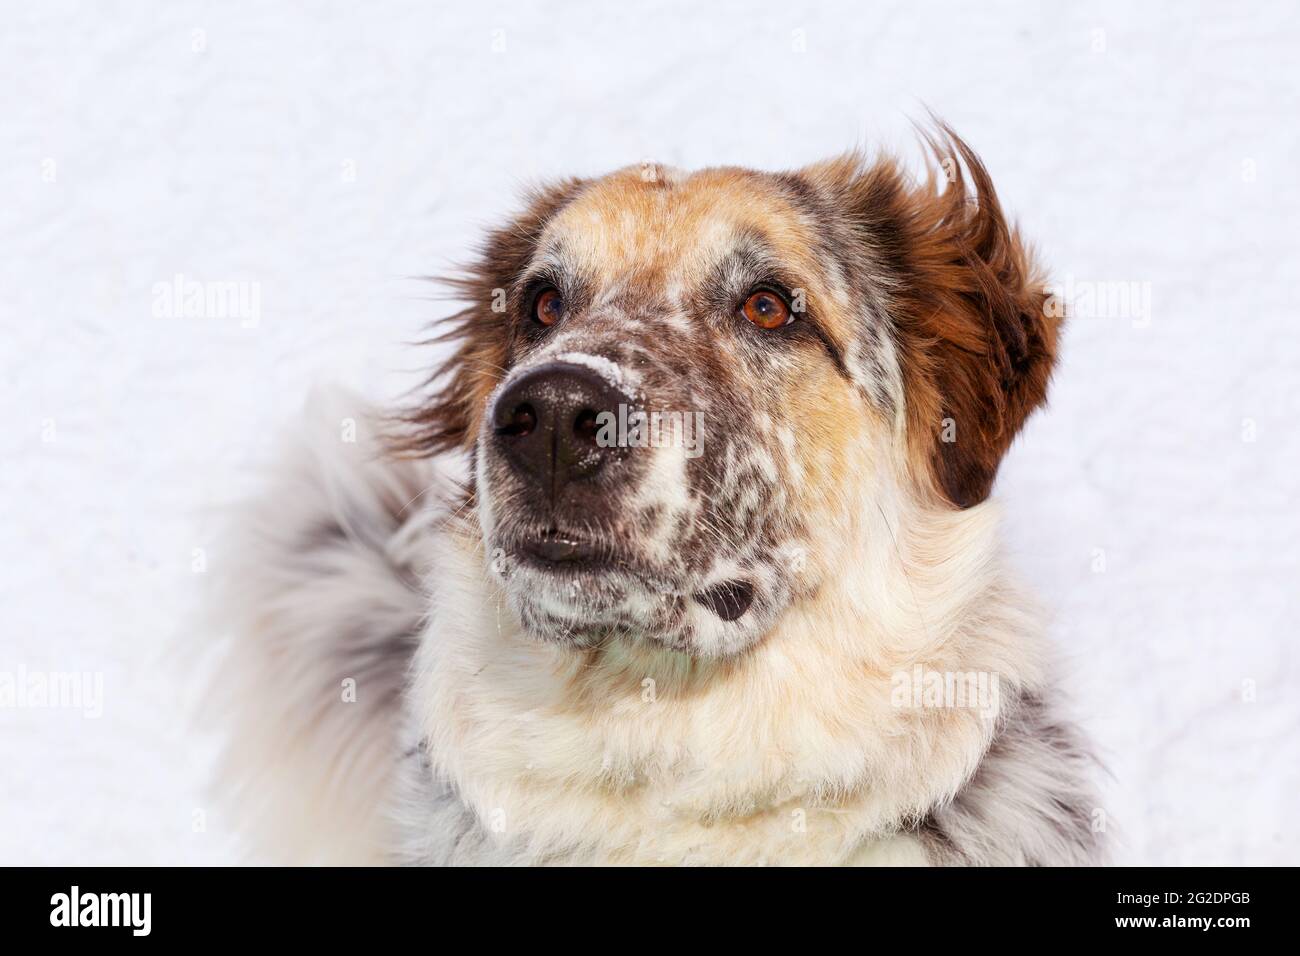 Attentive looking up big dog face close-up portrait Stock Photo